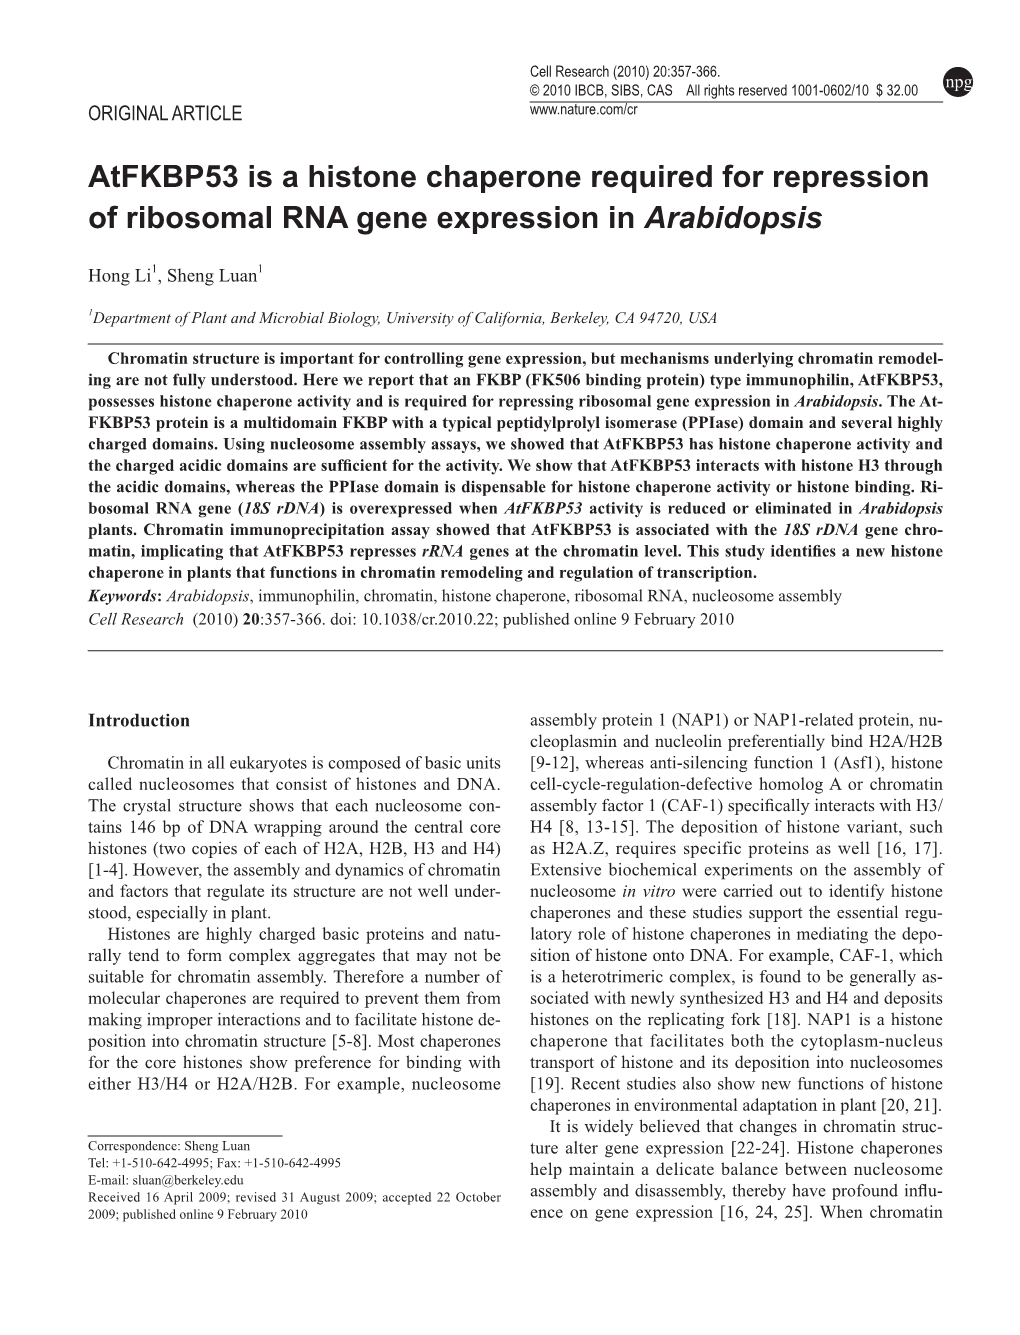 Atfkbp53 Is a Histone Chaperone Required for Repression of Ribosomal RNA Gene Expression in Arabidopsis